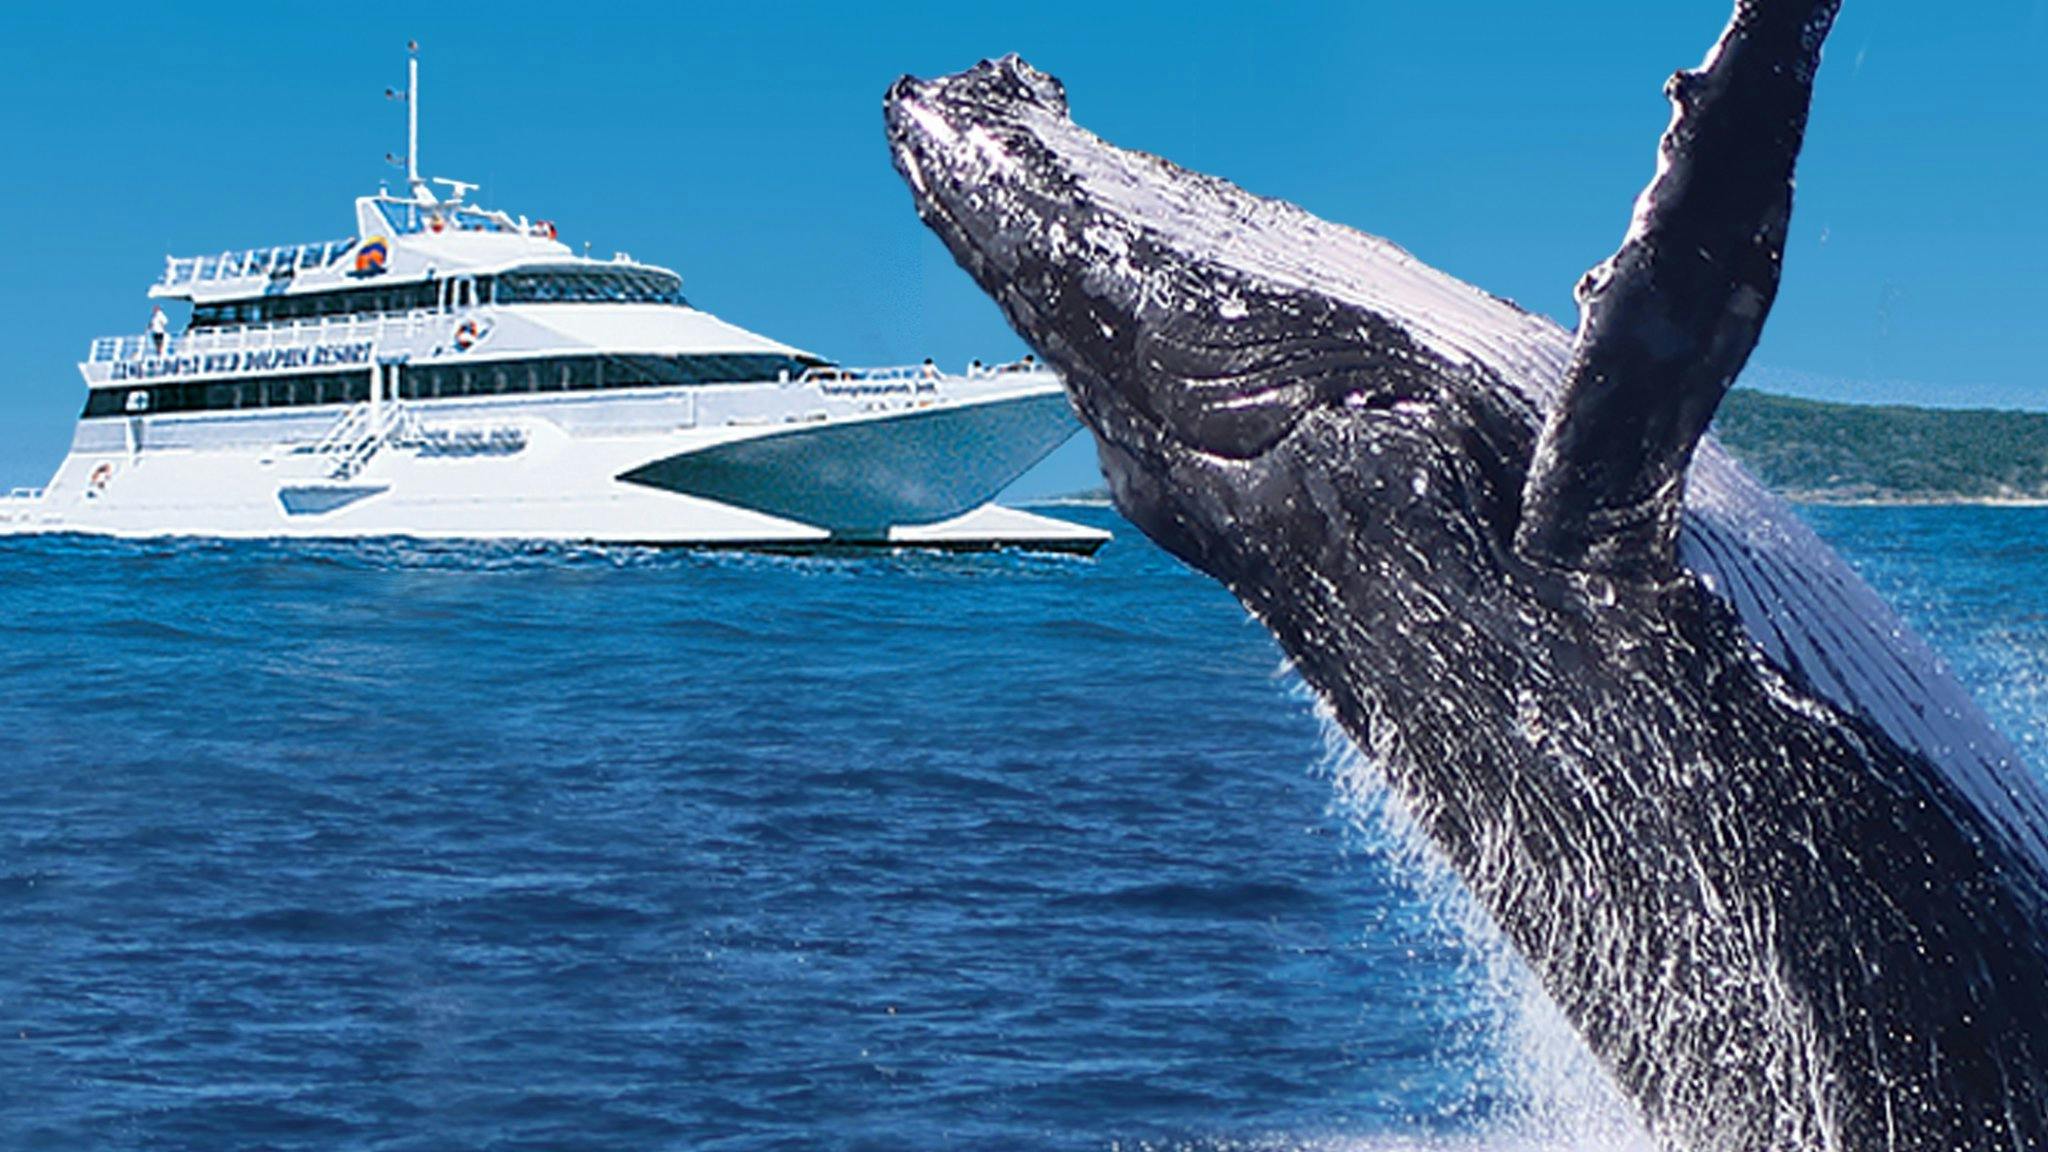 Tangalooma Whale Watch Cruises